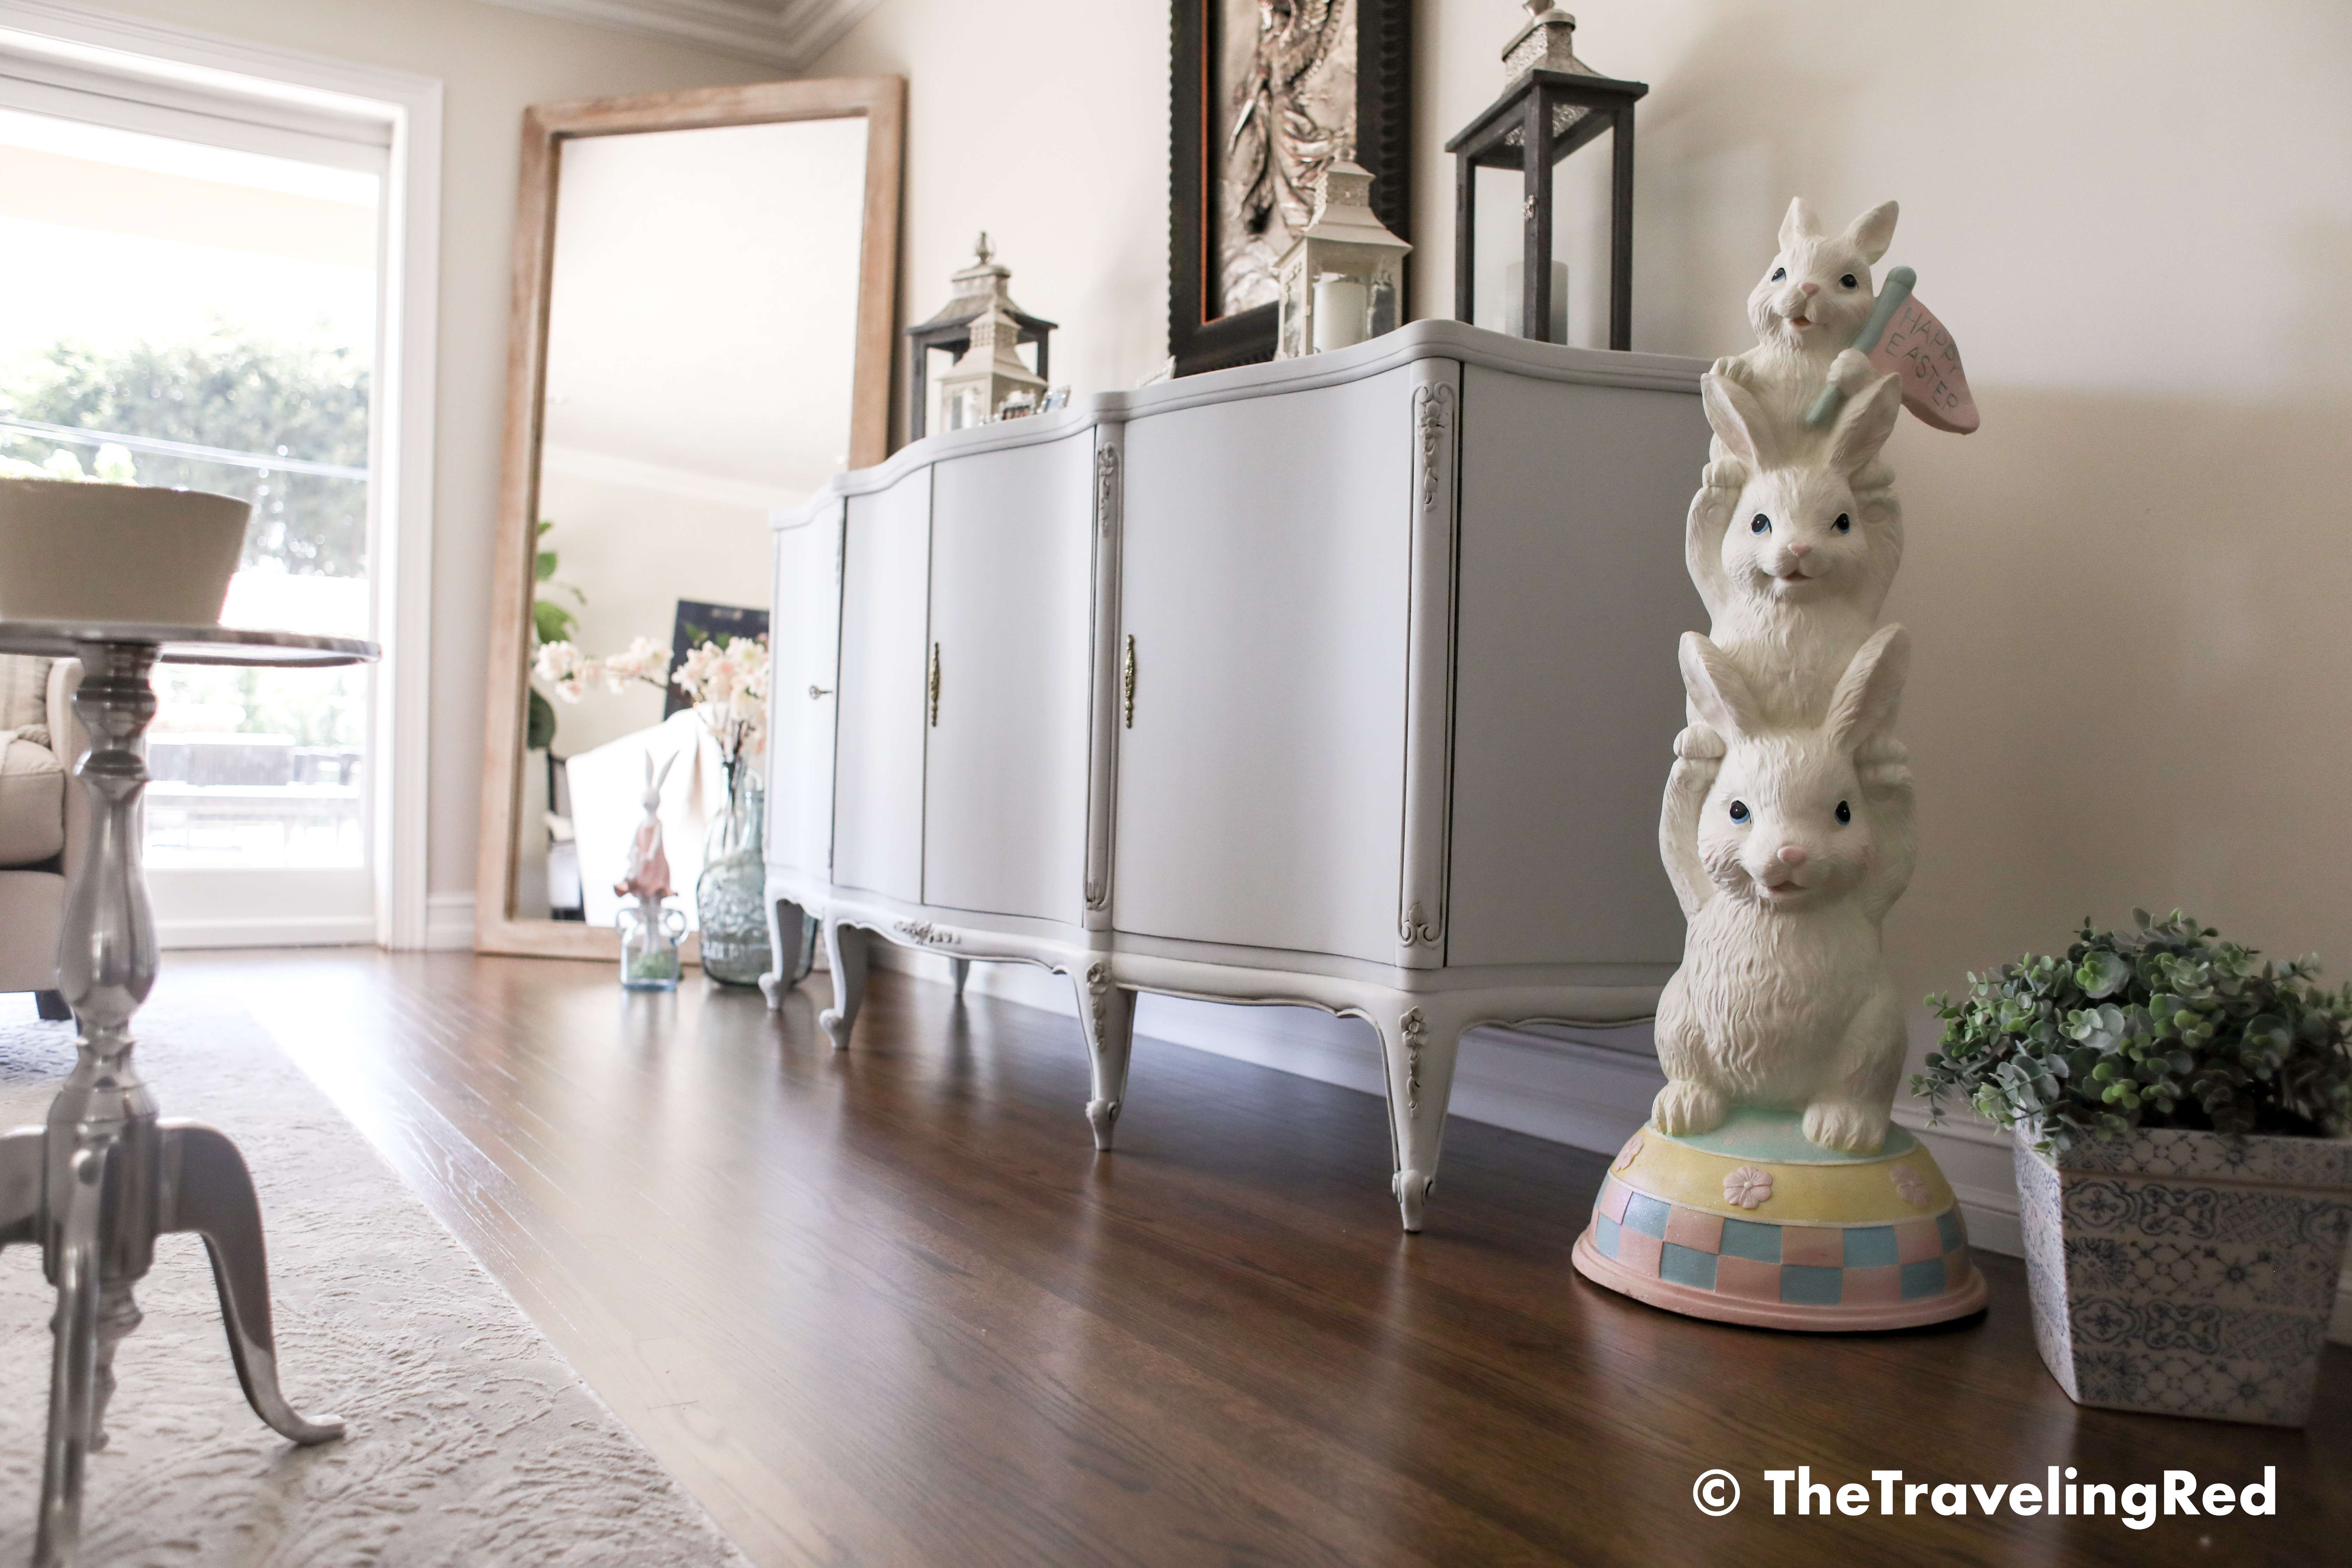 Easter home decor details in my living room and family room. Seasonal decorations perfect for spring and easter. Pillows, bunnies, candles and decor to fill the space in my modern farmhouse.